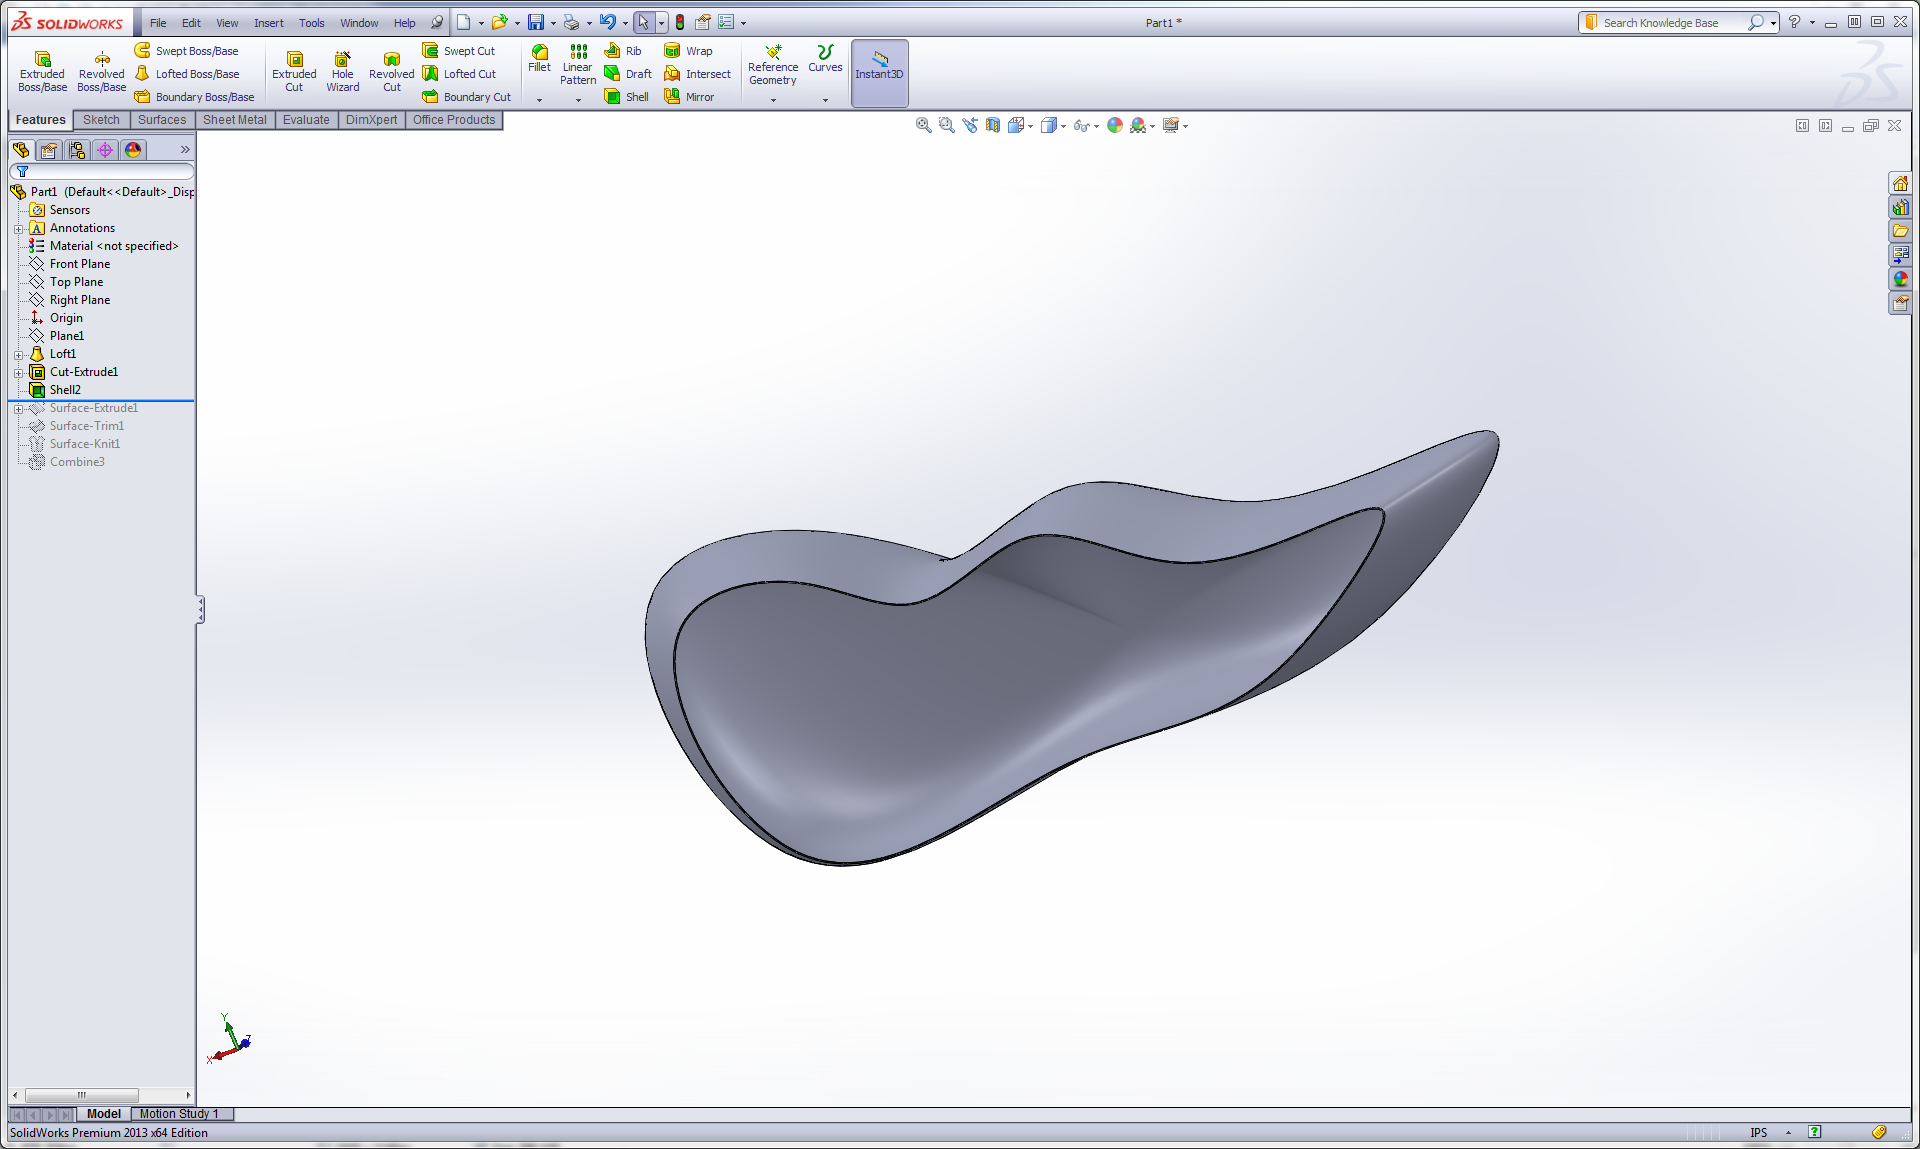 , How do we find the volume of voids in SolidWorks?